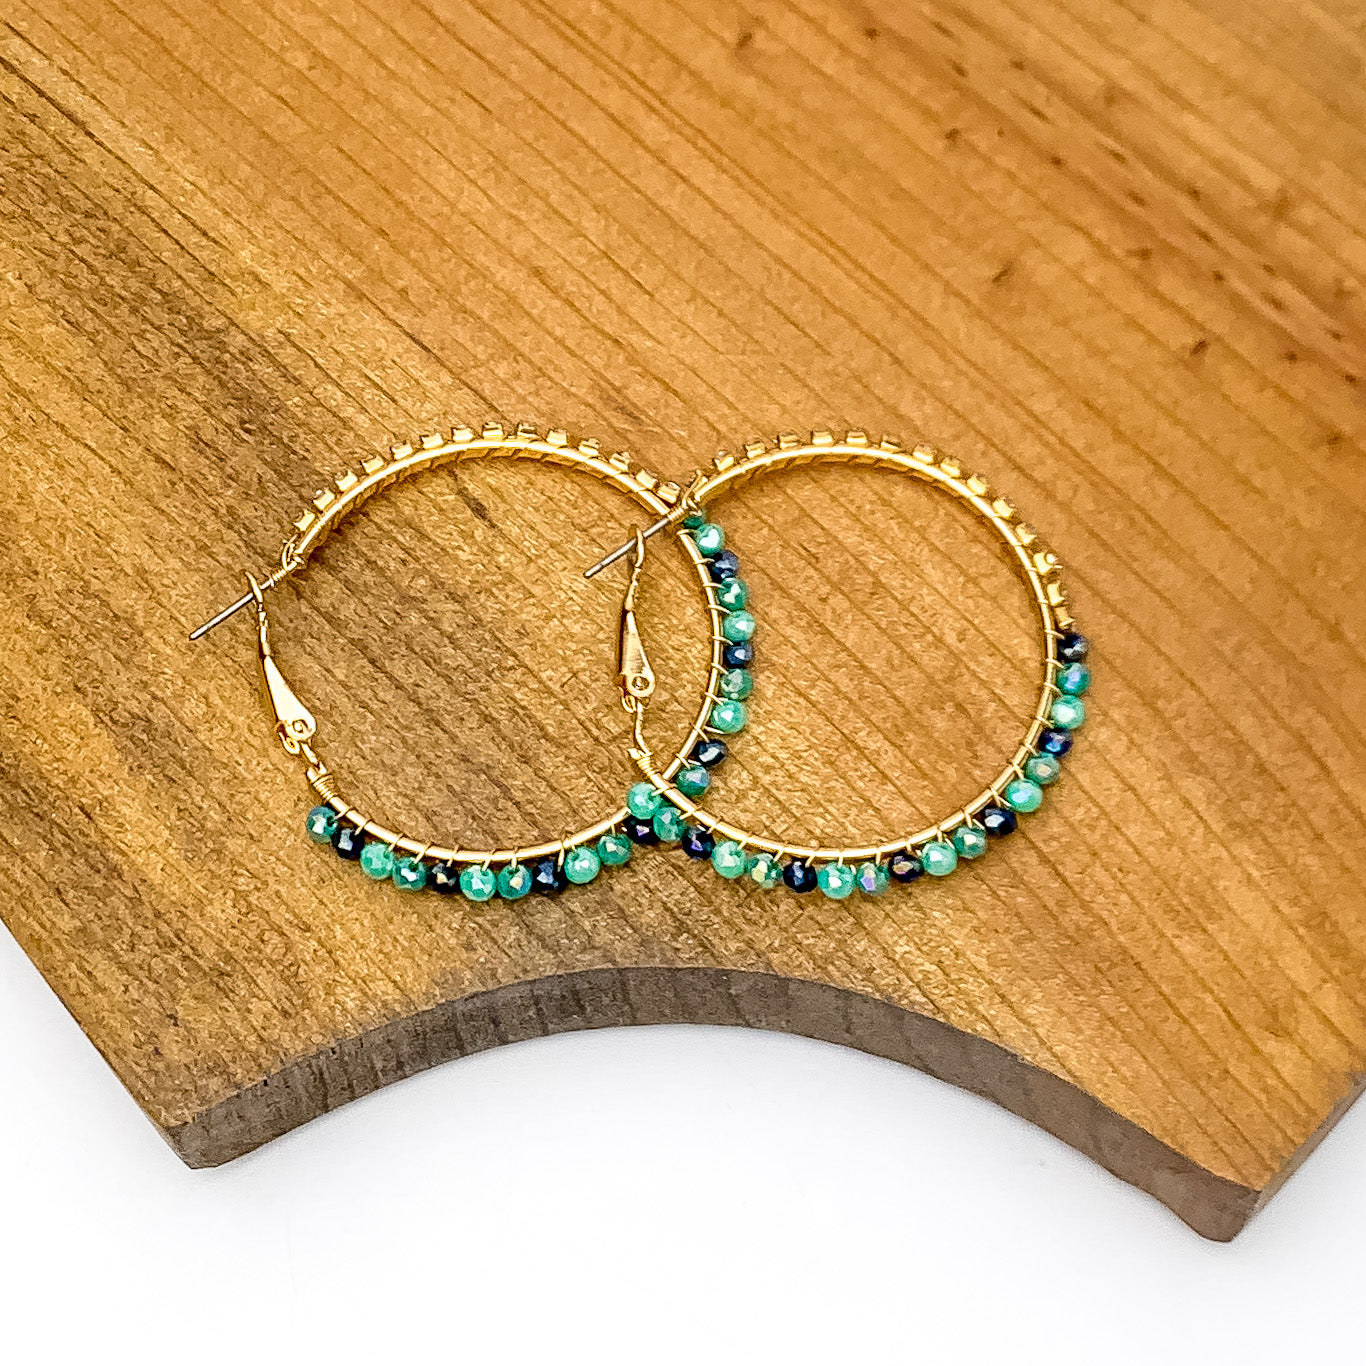 Gold Tone Hoop Earrings Wrapped in Clear and Blue Crystals. Pictured on a piece of wood.